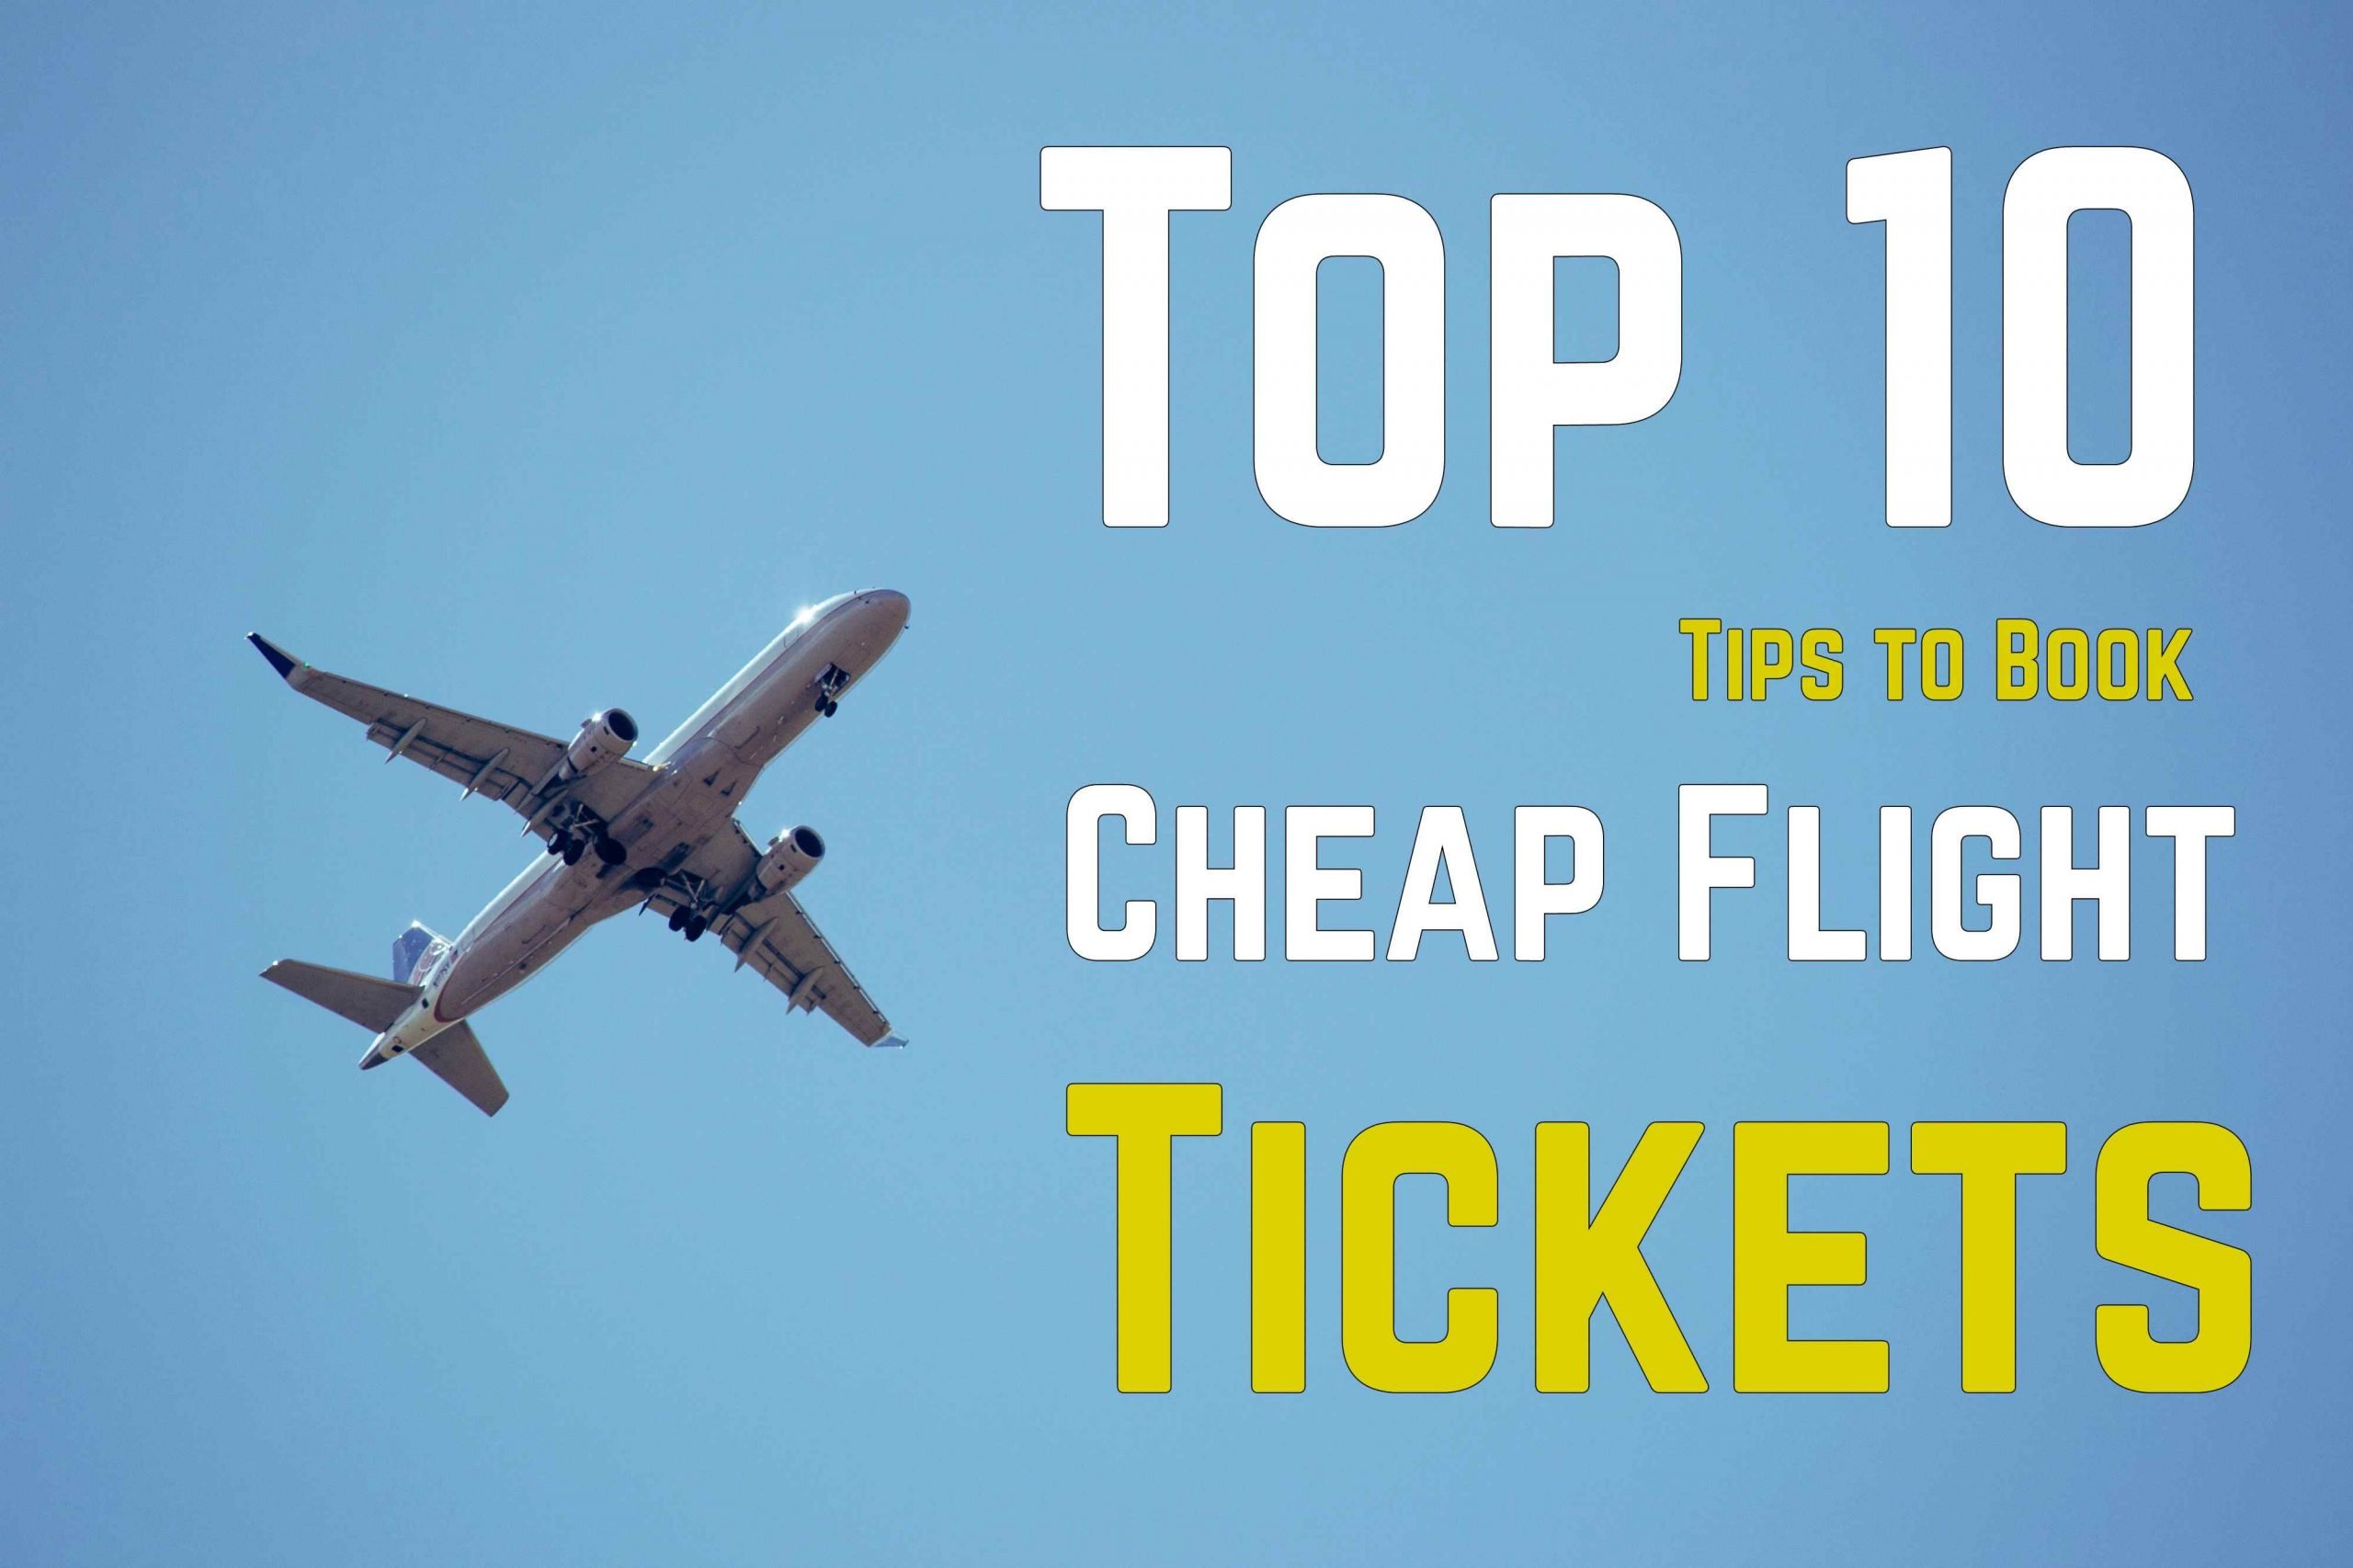 Top 10 Tips to Book Cheap Flight Tickets in 2019